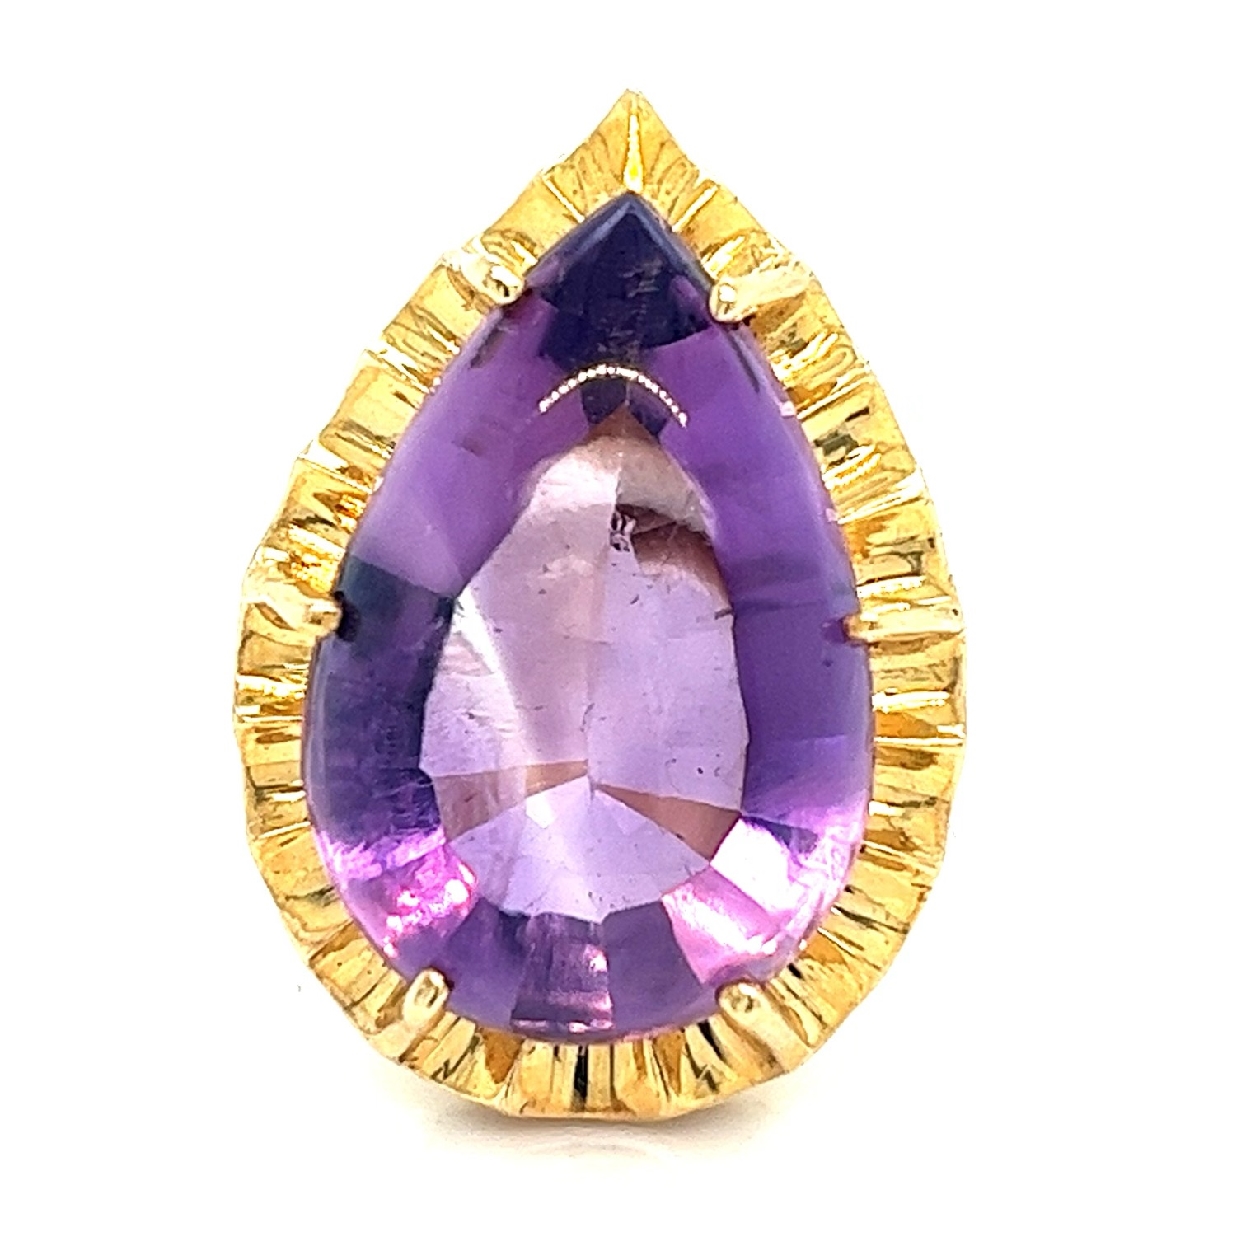 14K Yellow Gold Ring with Teardrop Faceted Cabochan Amethyst
Size 7.25